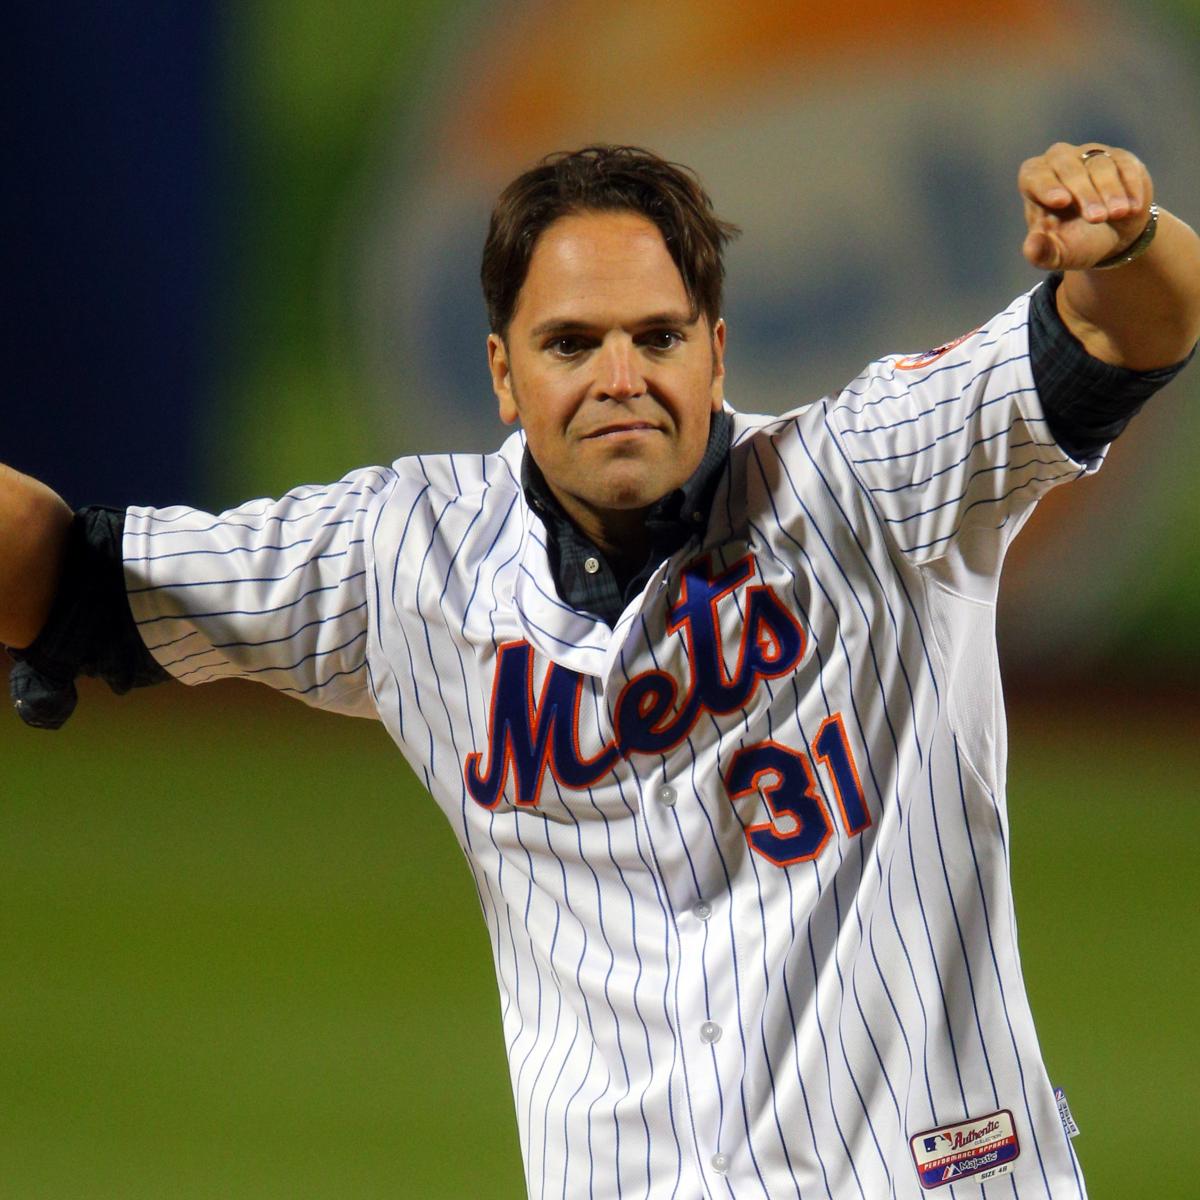 Memories of first Mets game after 9/11, Mike Piazza's home run